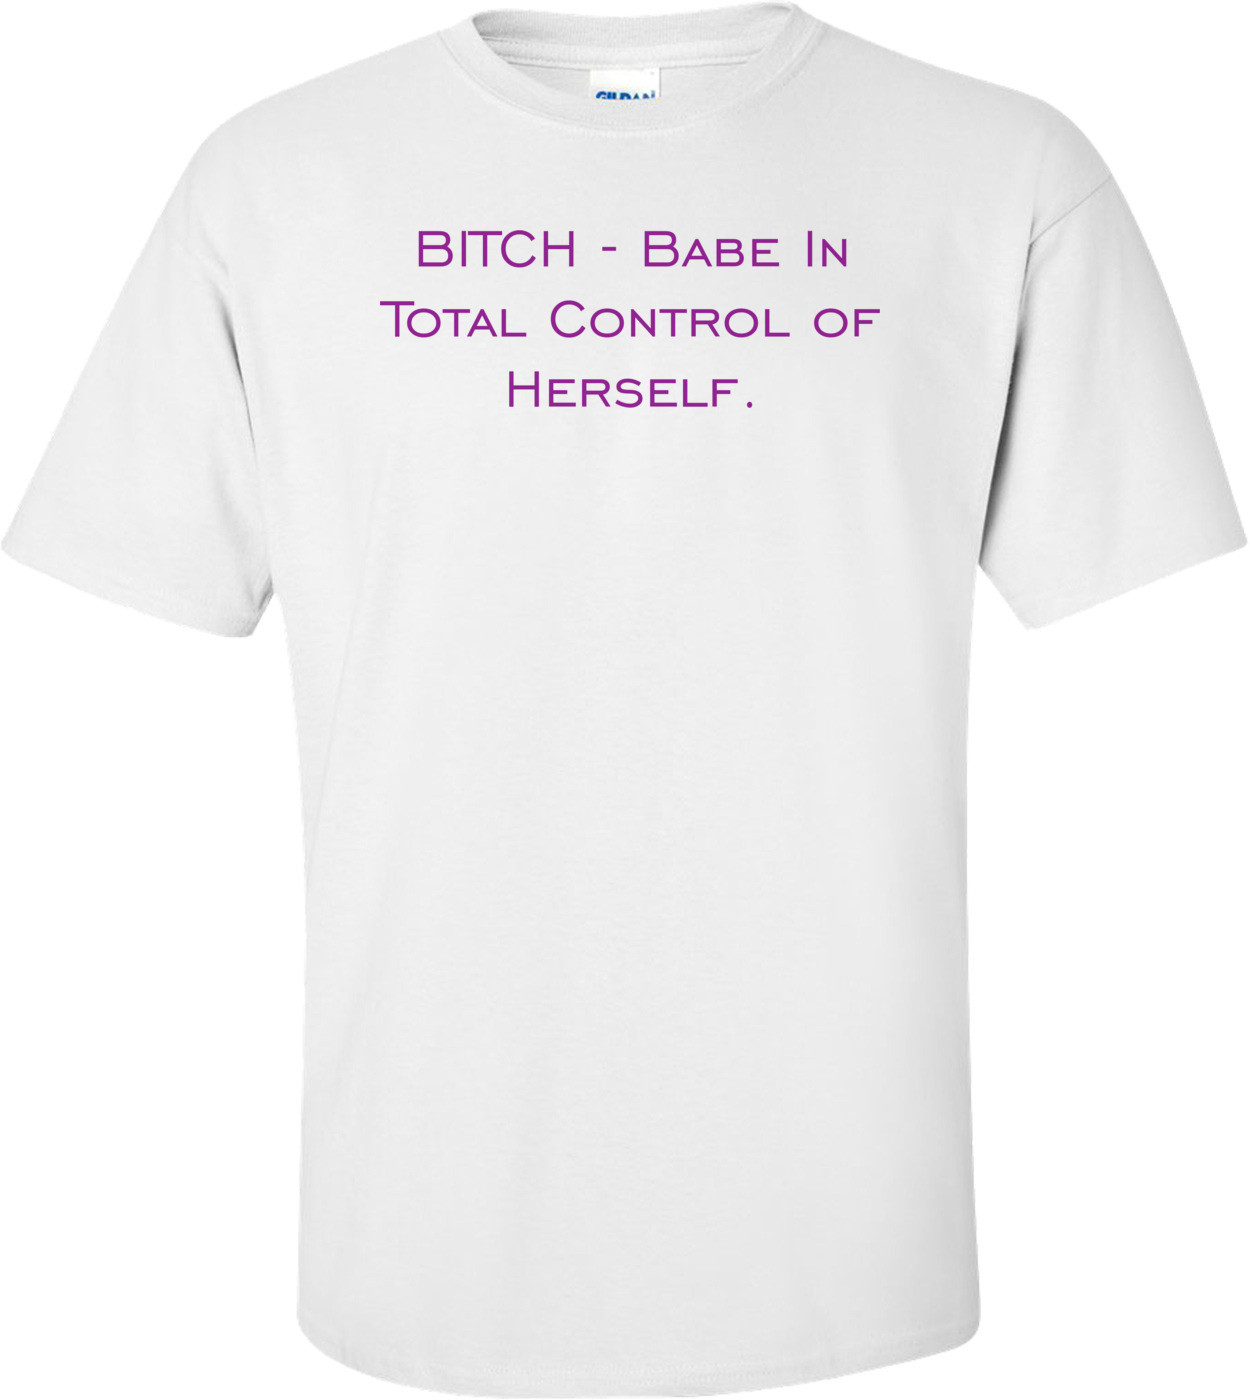 BITCH - Babe In Total Control of Herself. Shirt